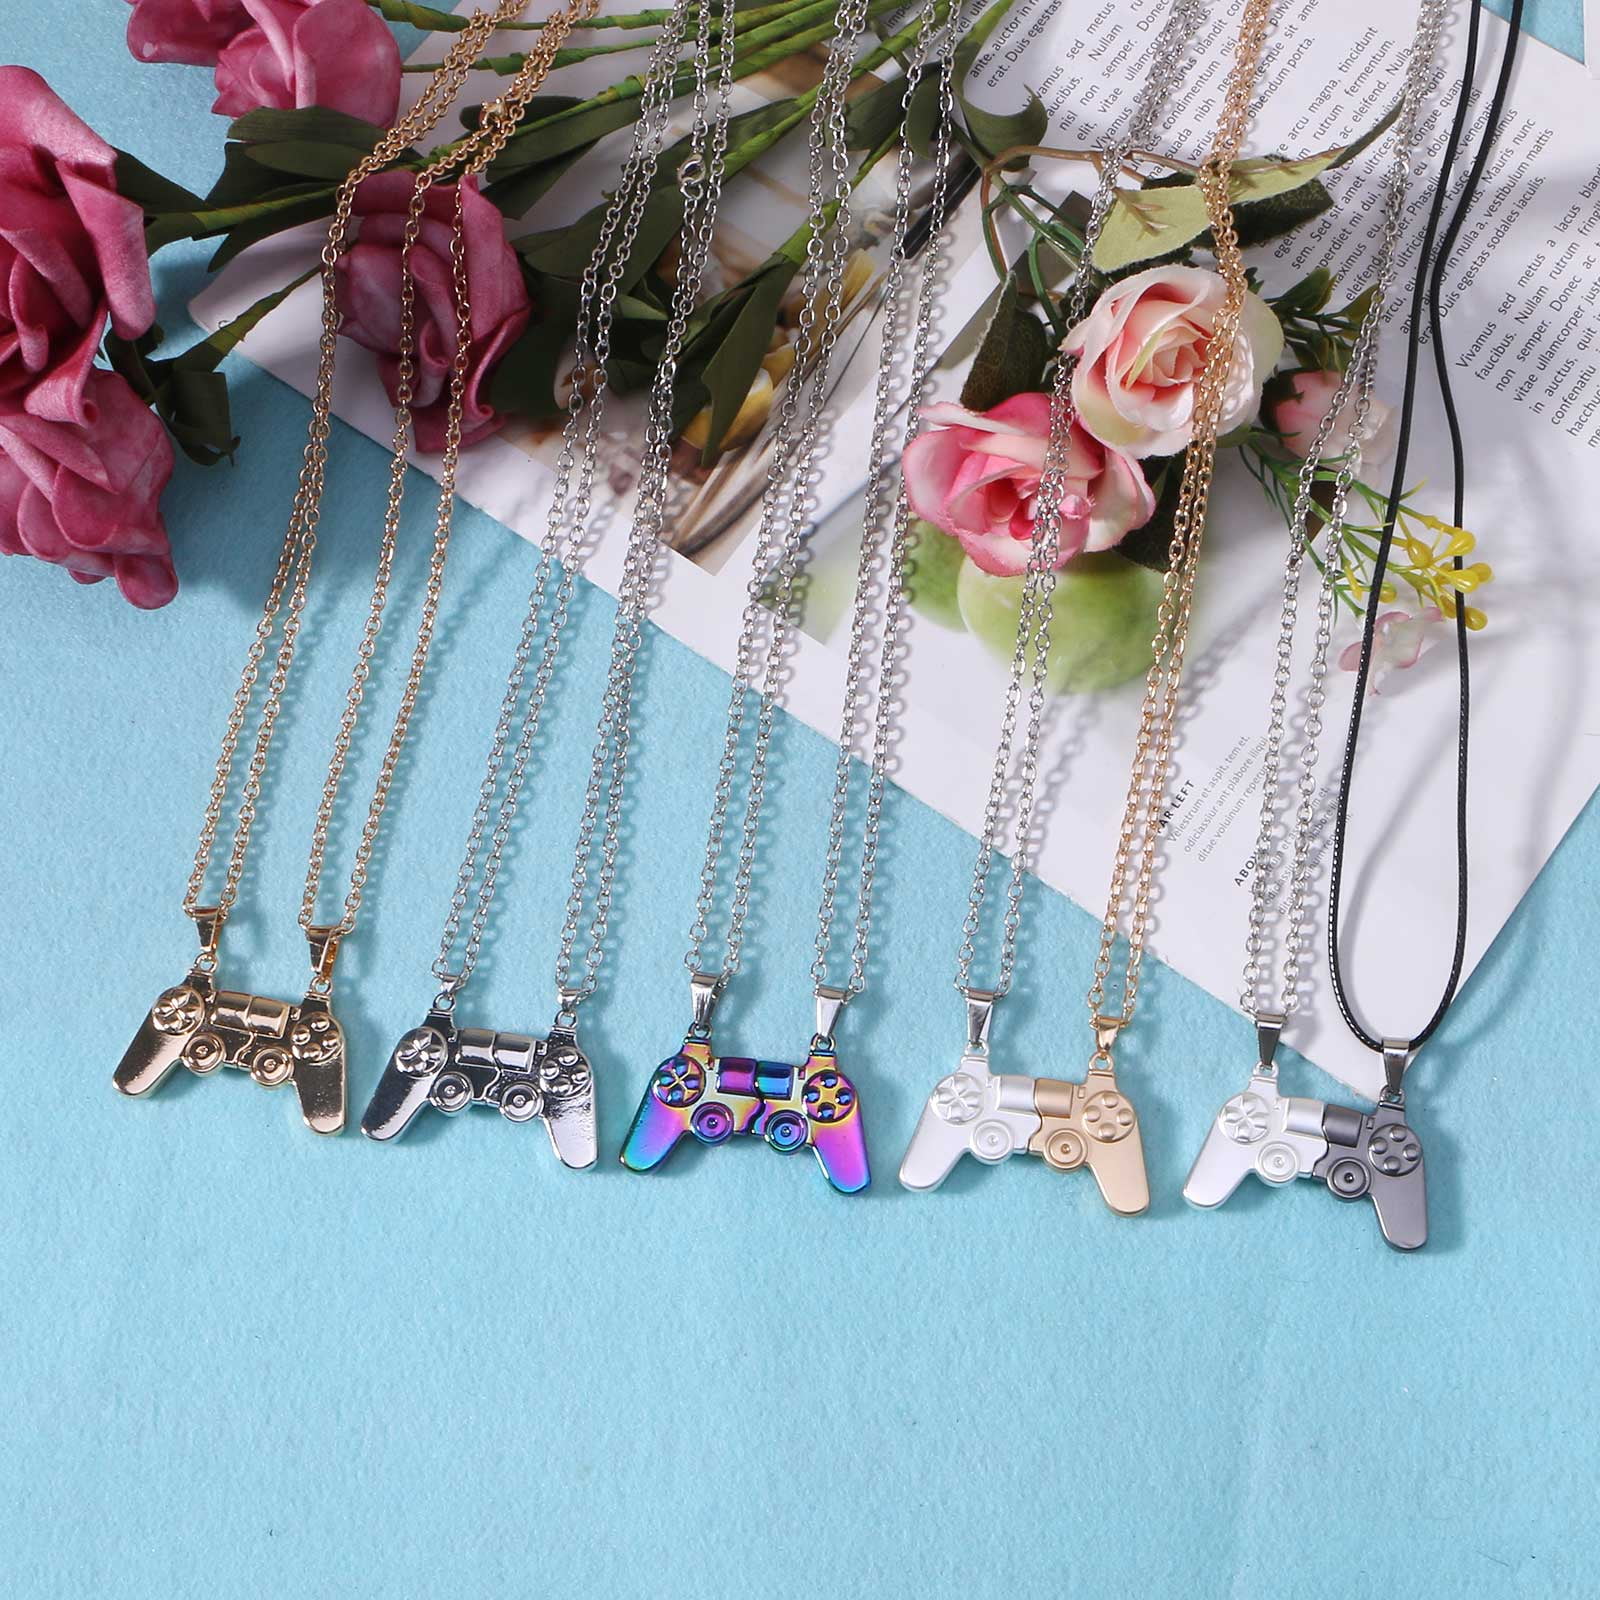 Snapklik.com : DOYYCA Best Friend Necklace Gifts Magnetic Matching Friendship  Necklace For 2 Girls BFF Sister